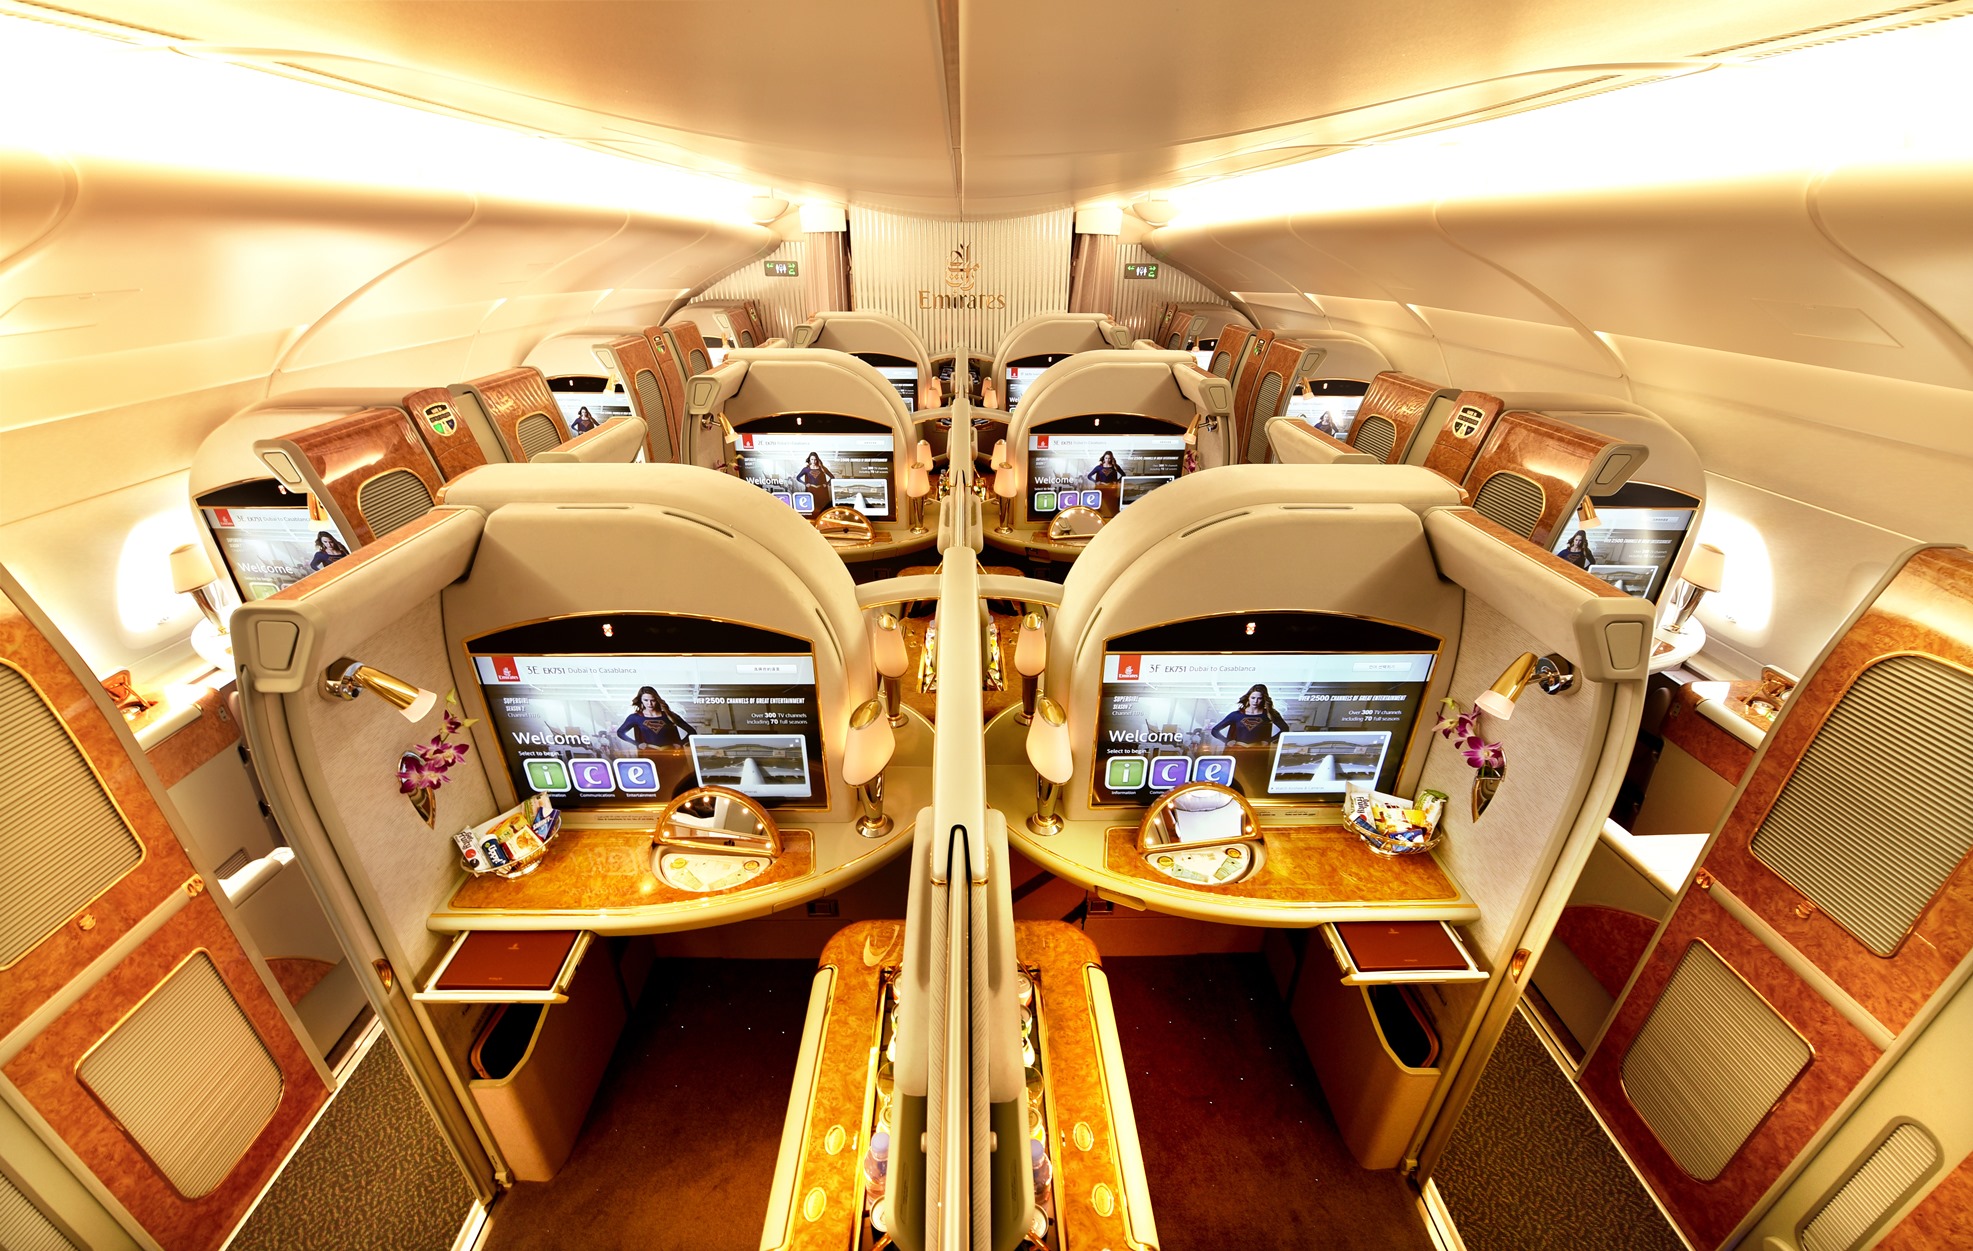 Have you been on the Emirates A380?